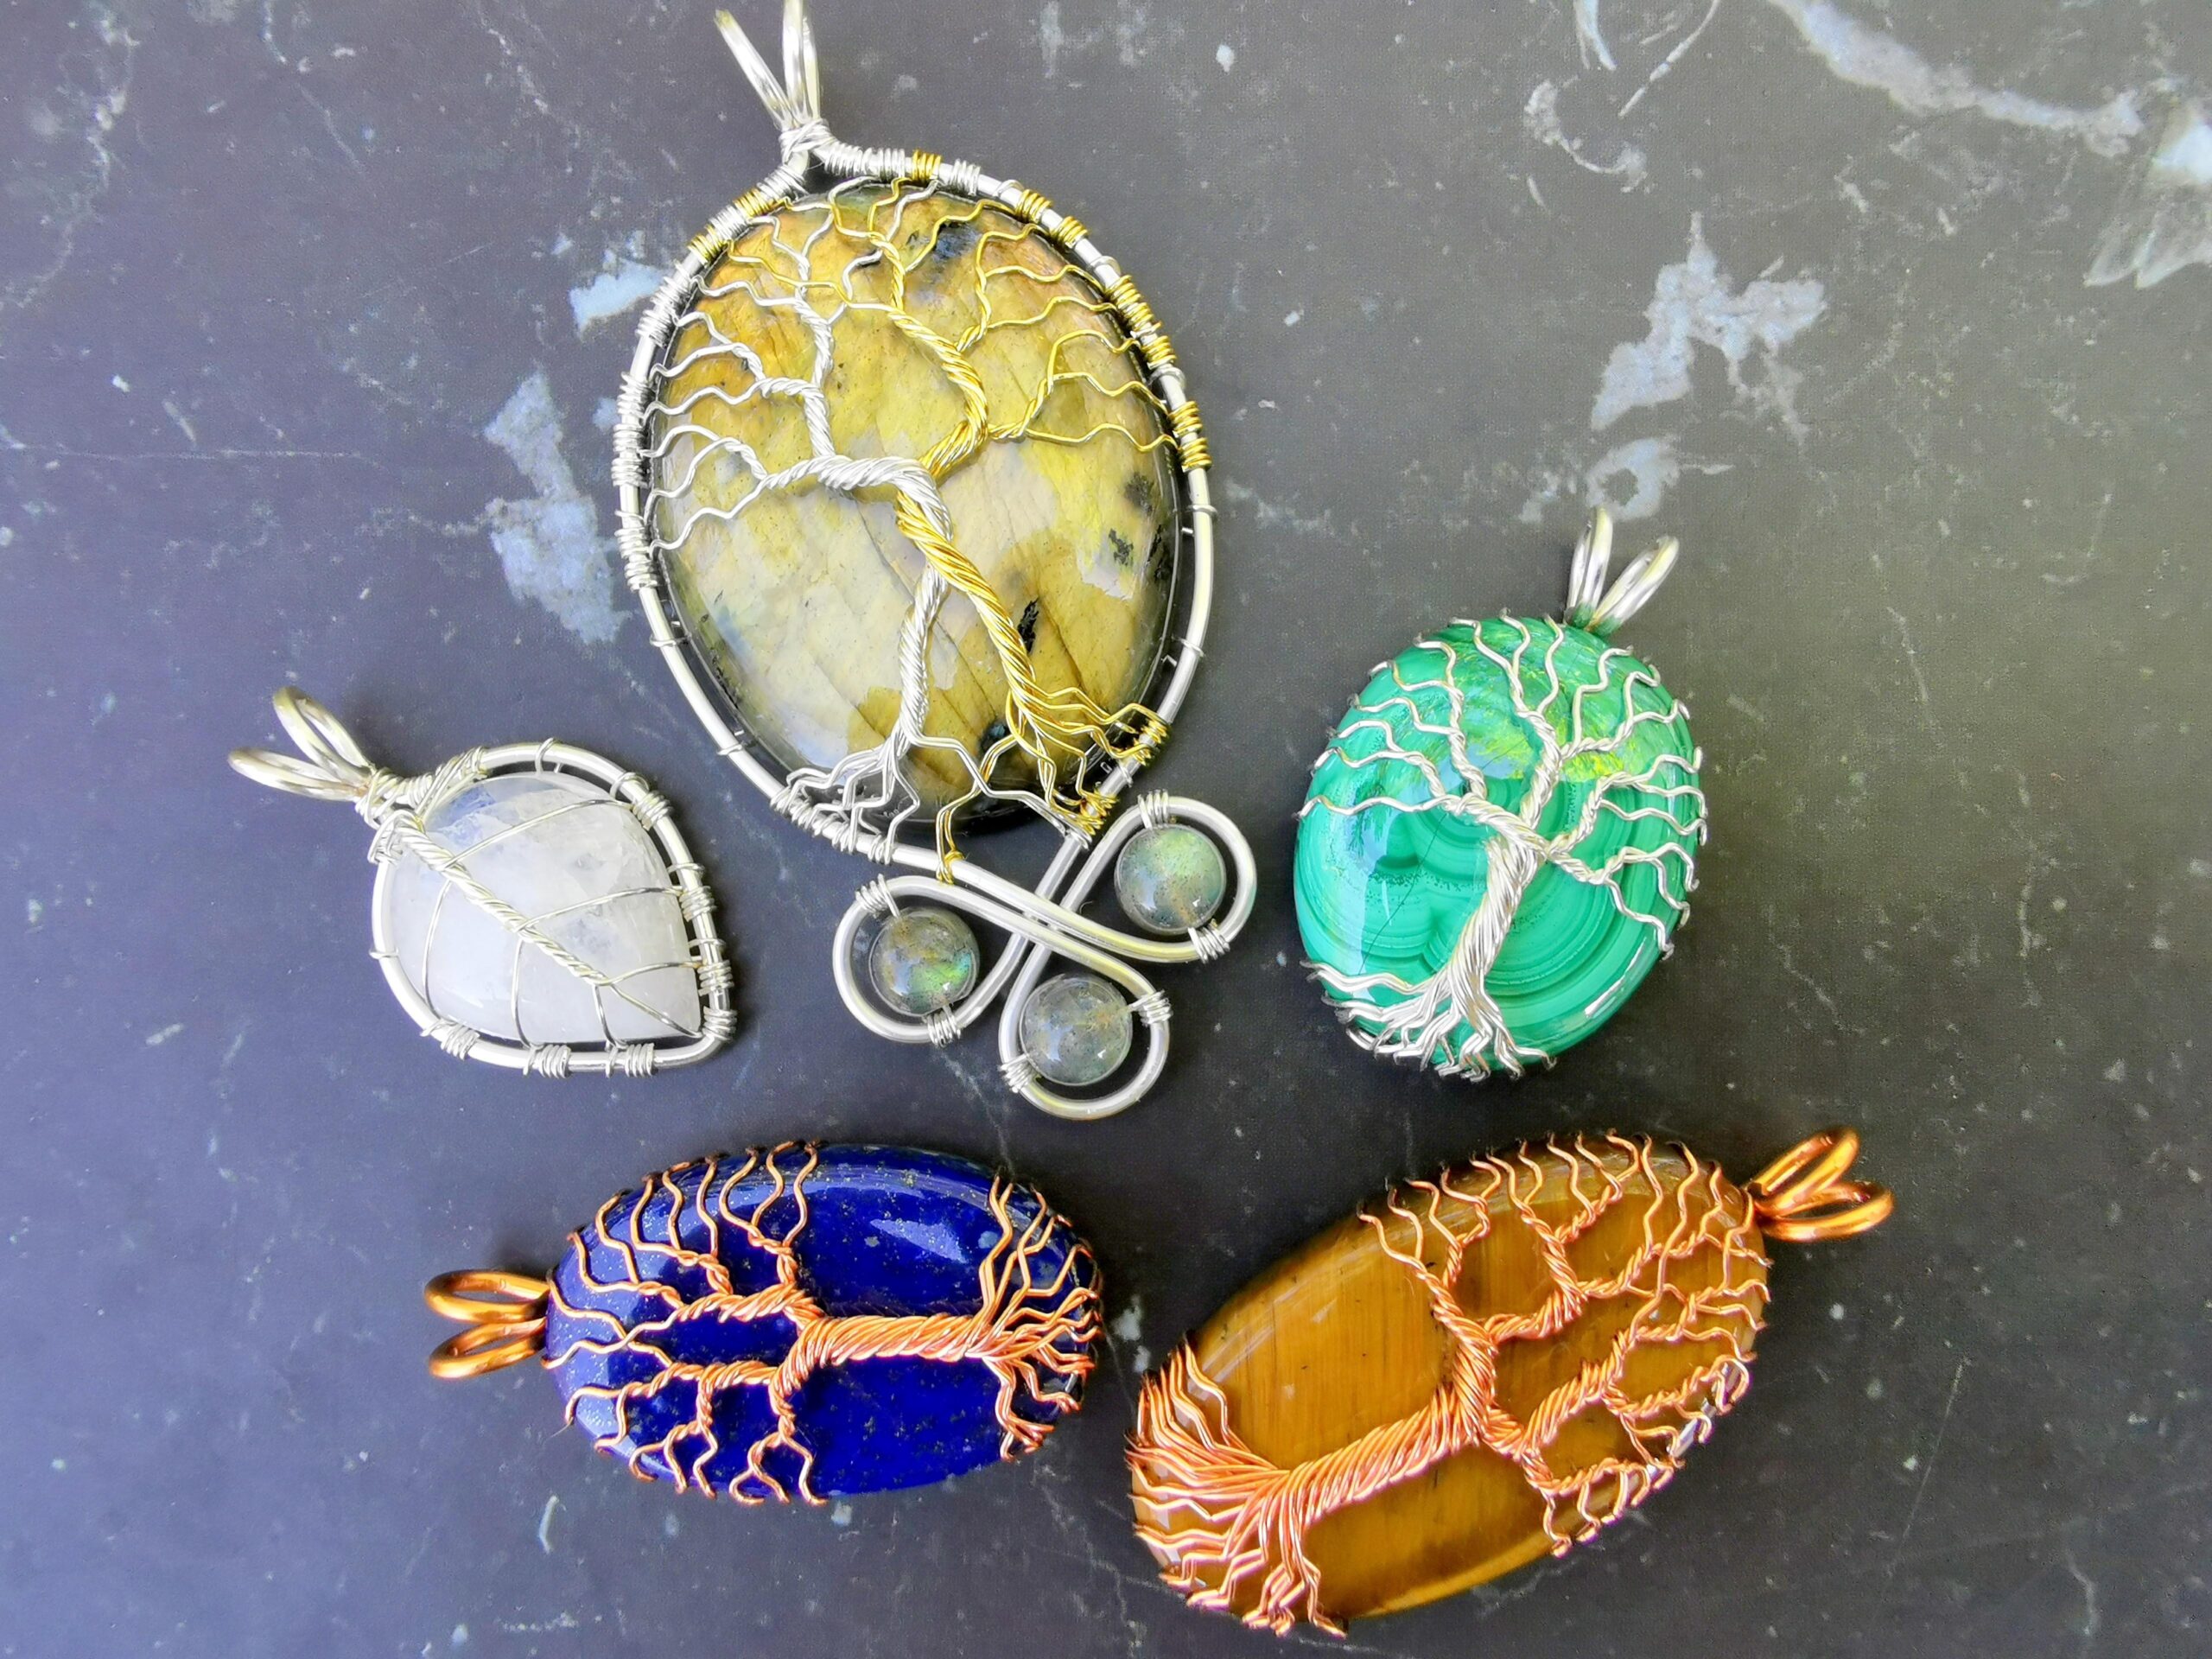 I made some elven pendants with wire and diversified gem stones.